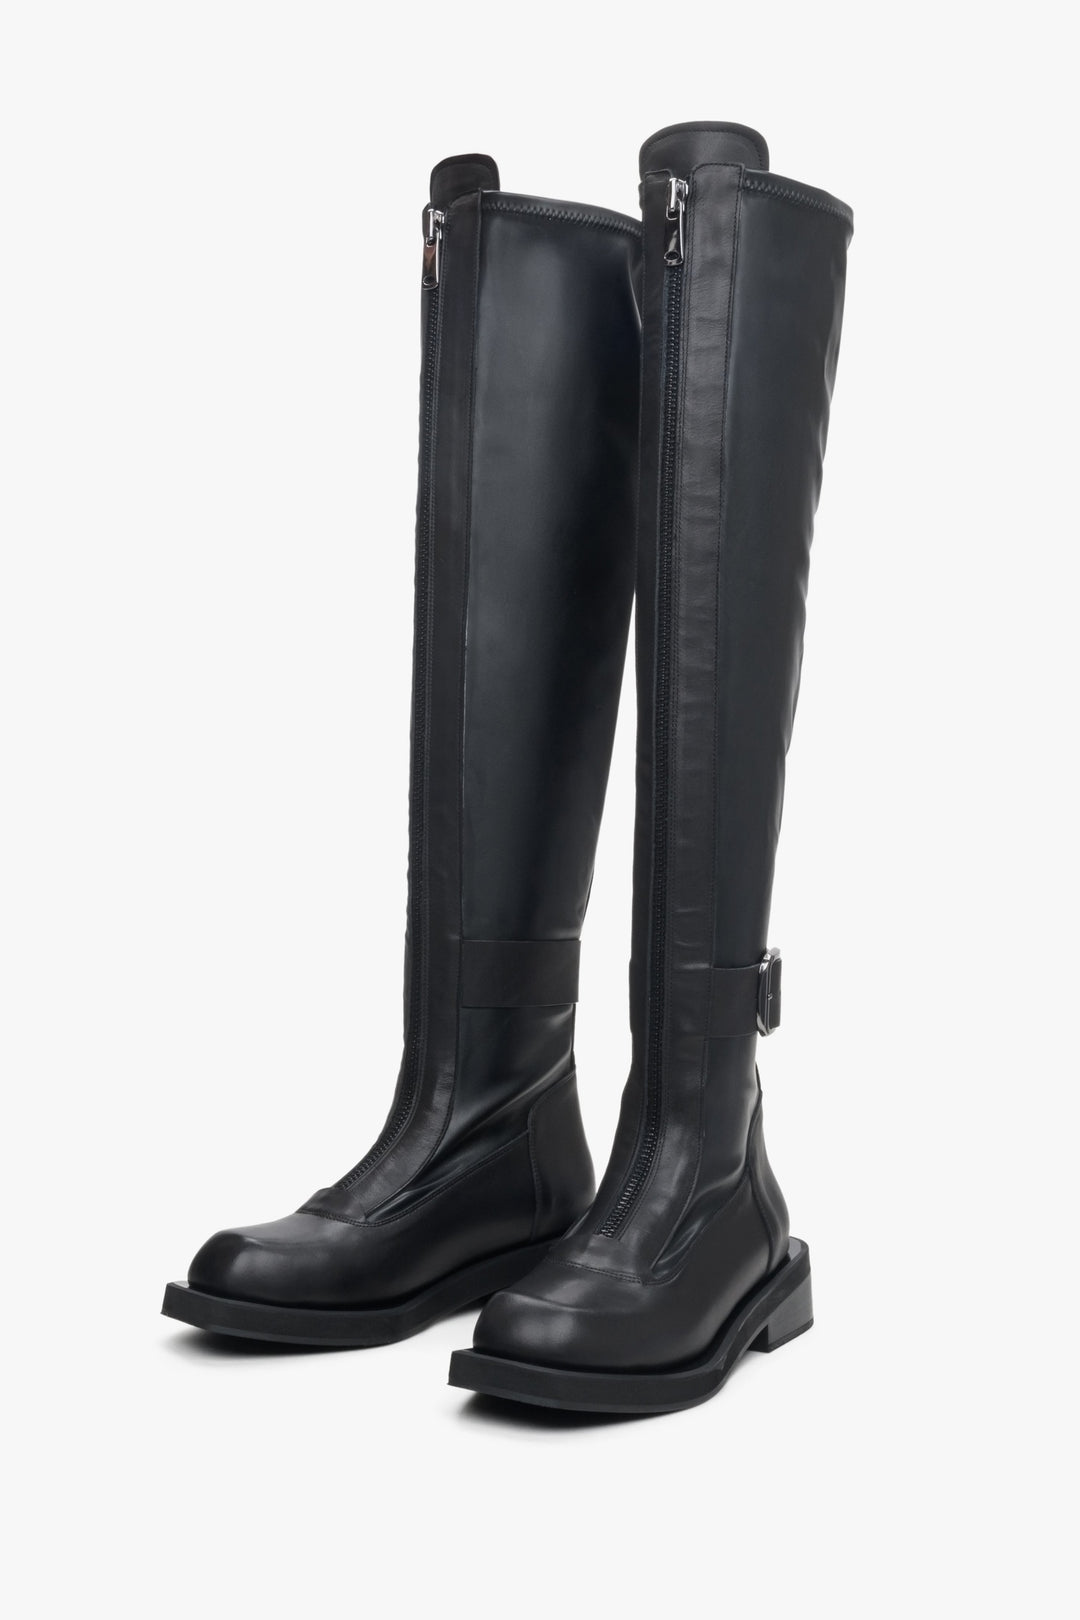 Estro women's black leather high  boots - close-up on the front of the model.